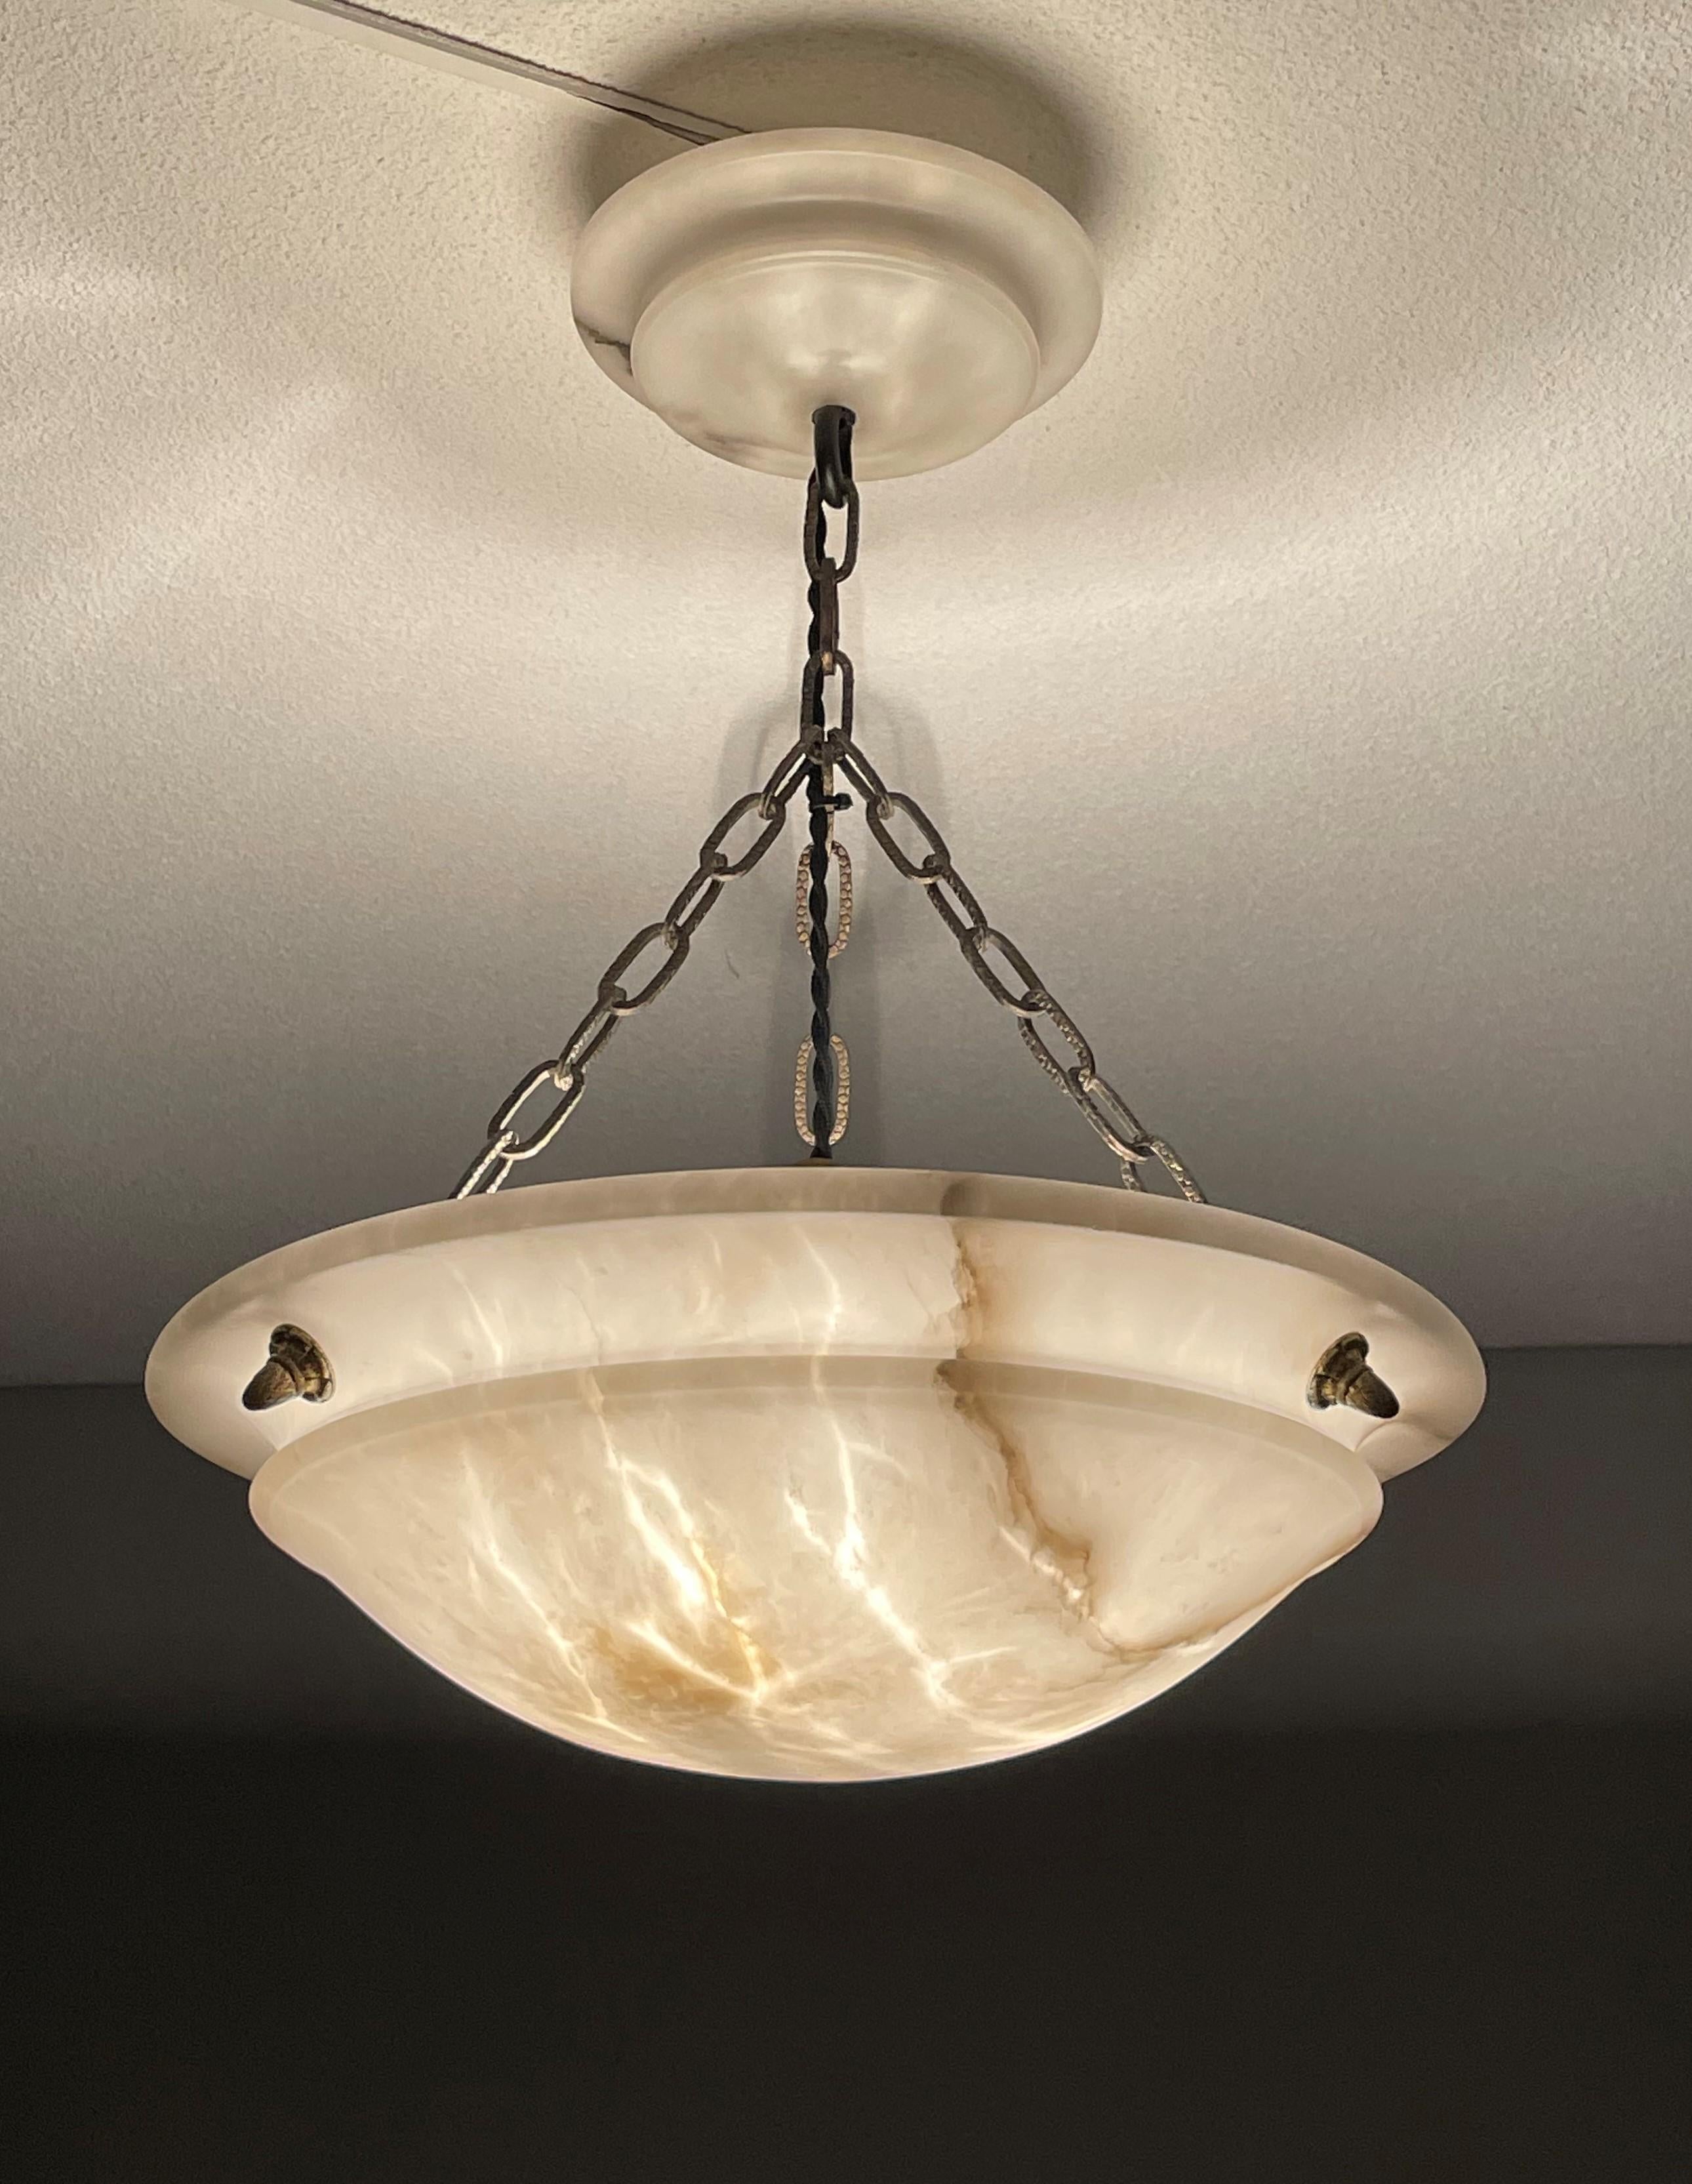 Medium size antique light fixture for an entry hall, kitchen area, bedroom etc.

With antique light fixtures being one of our specialities, we always love finding timeless pendants that will bring light and beauty into our client's homes. This